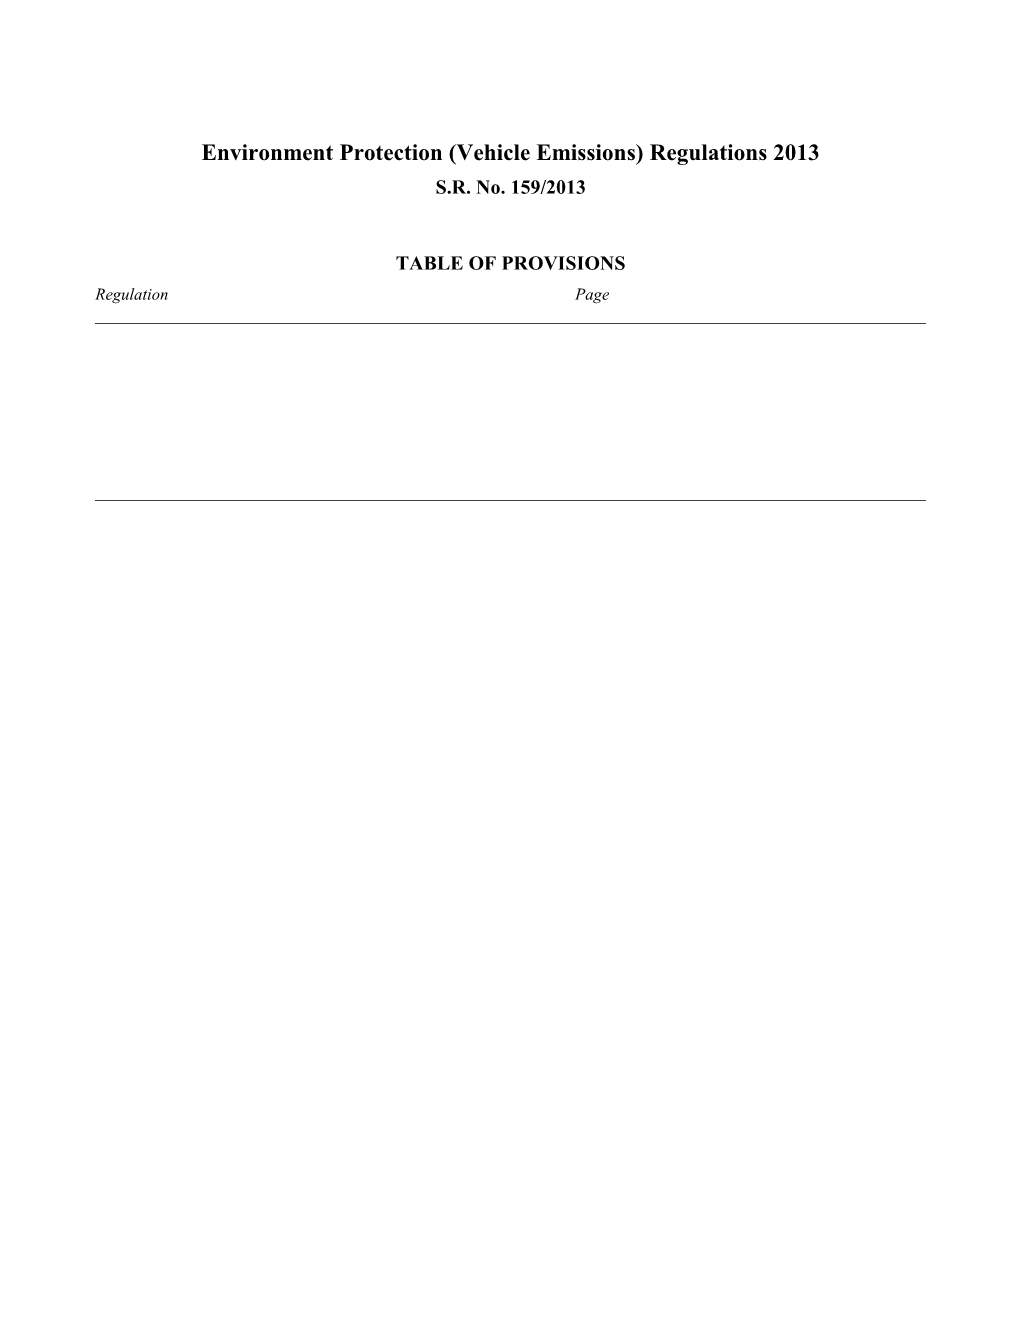 Environment Protection (Vehicle Emissions) Regulations 2013